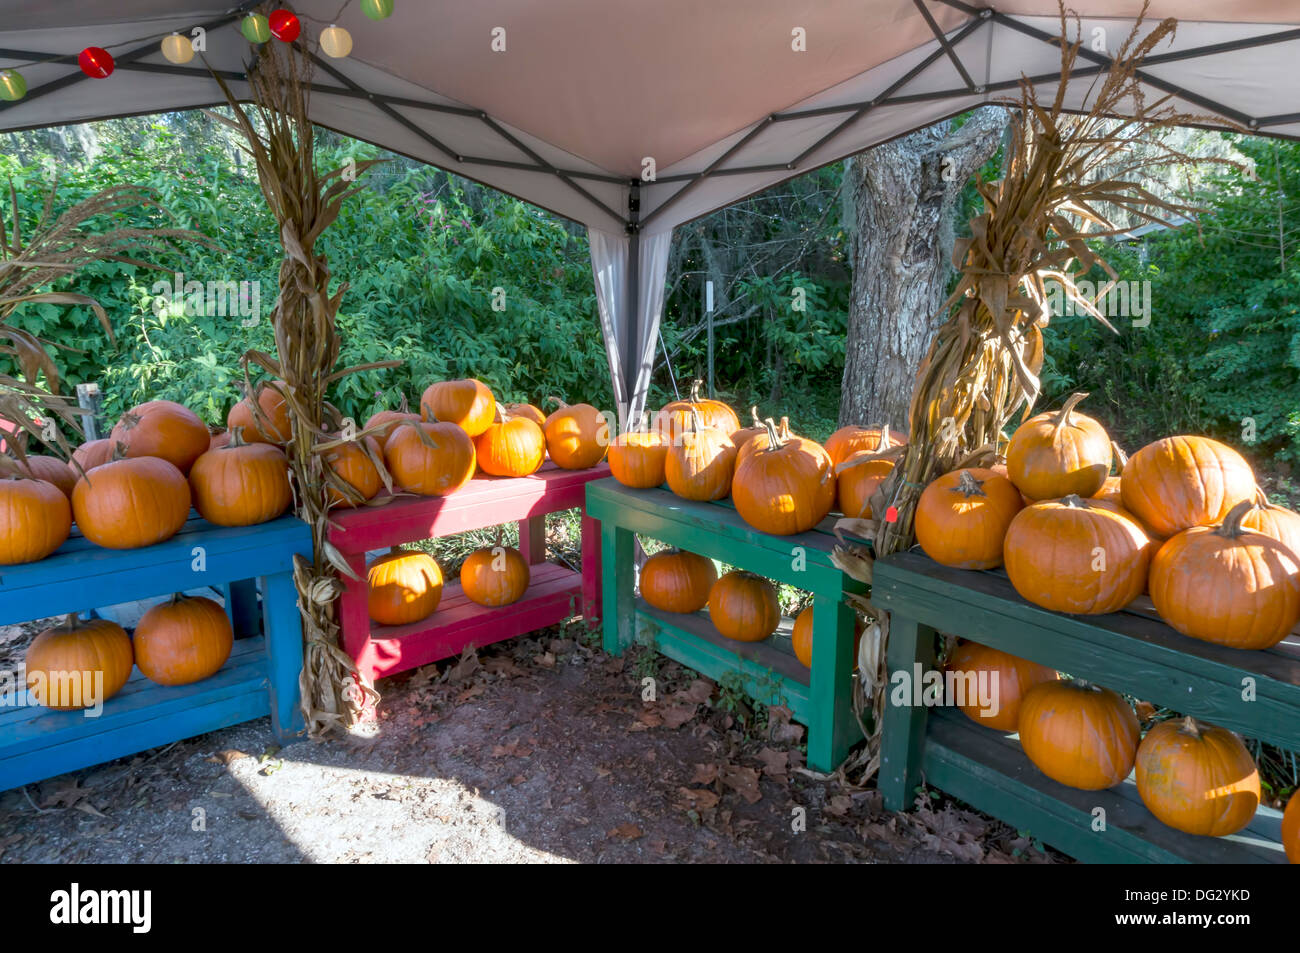 Halloween and Thanksgiving orange pumpkins [Cucurbita pepo] for sale in a roadside vegetable stand tent. Stock Photo